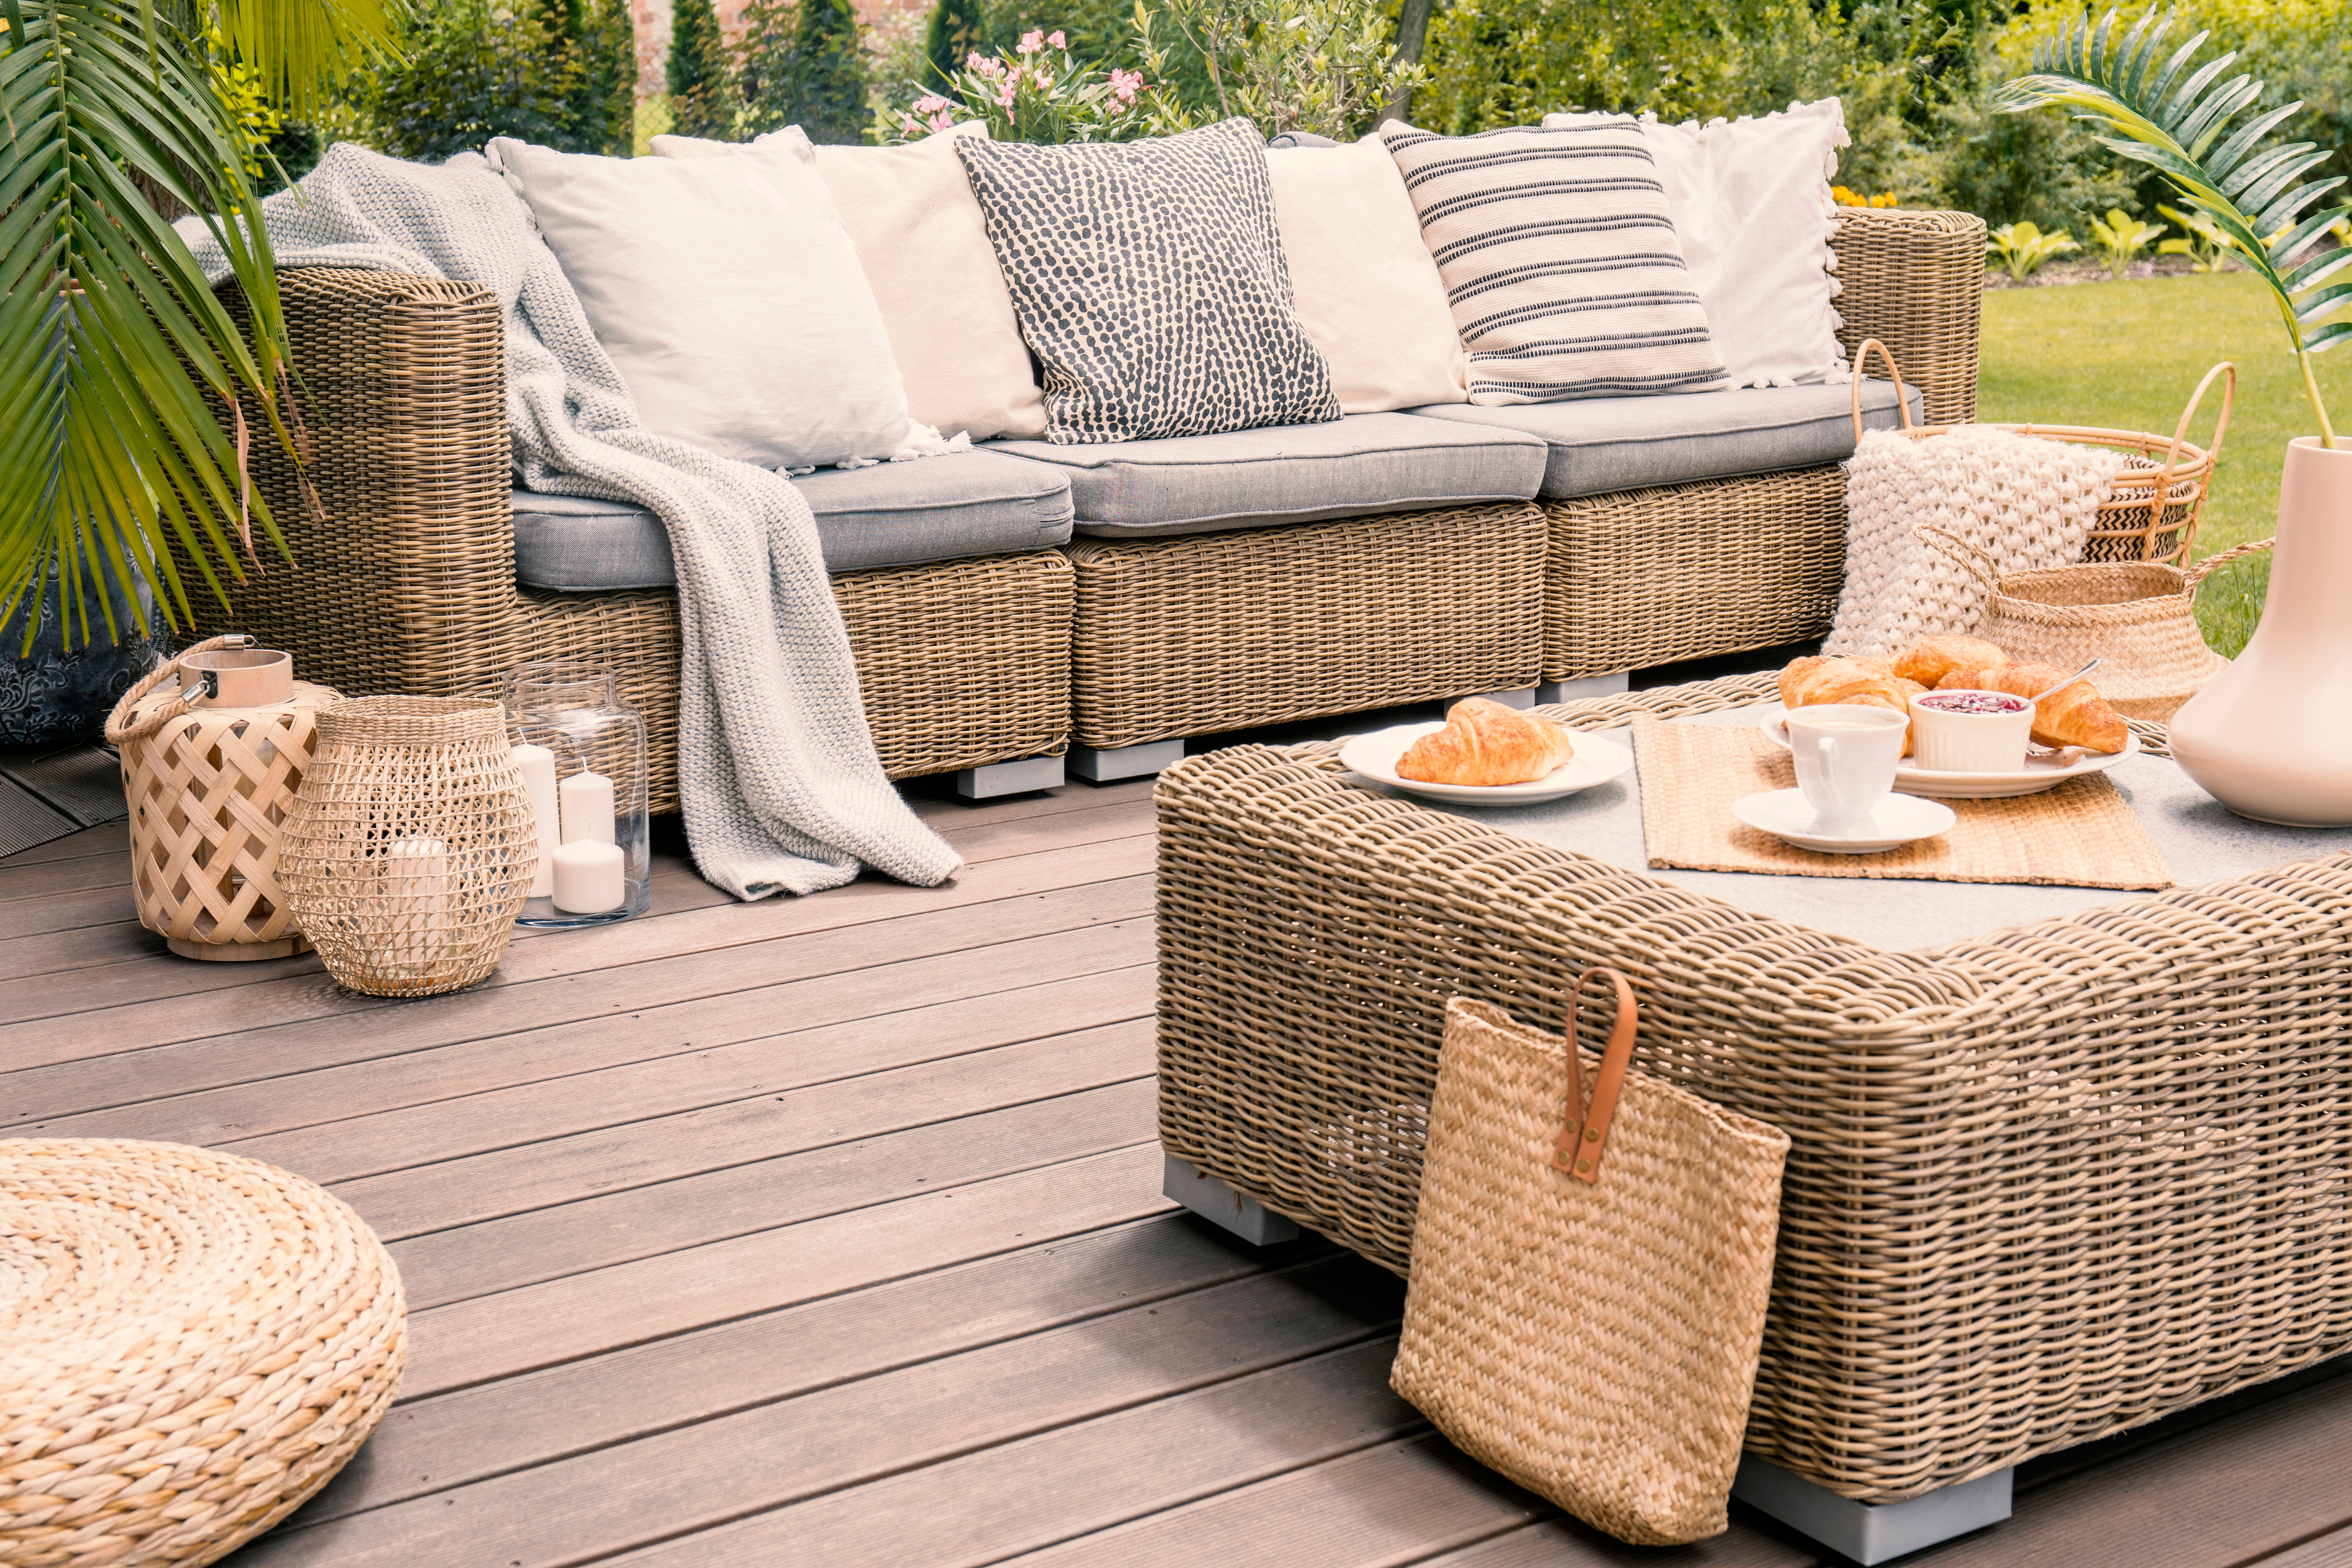 Outdoor furniture review: Ratings for the perfect patio setup